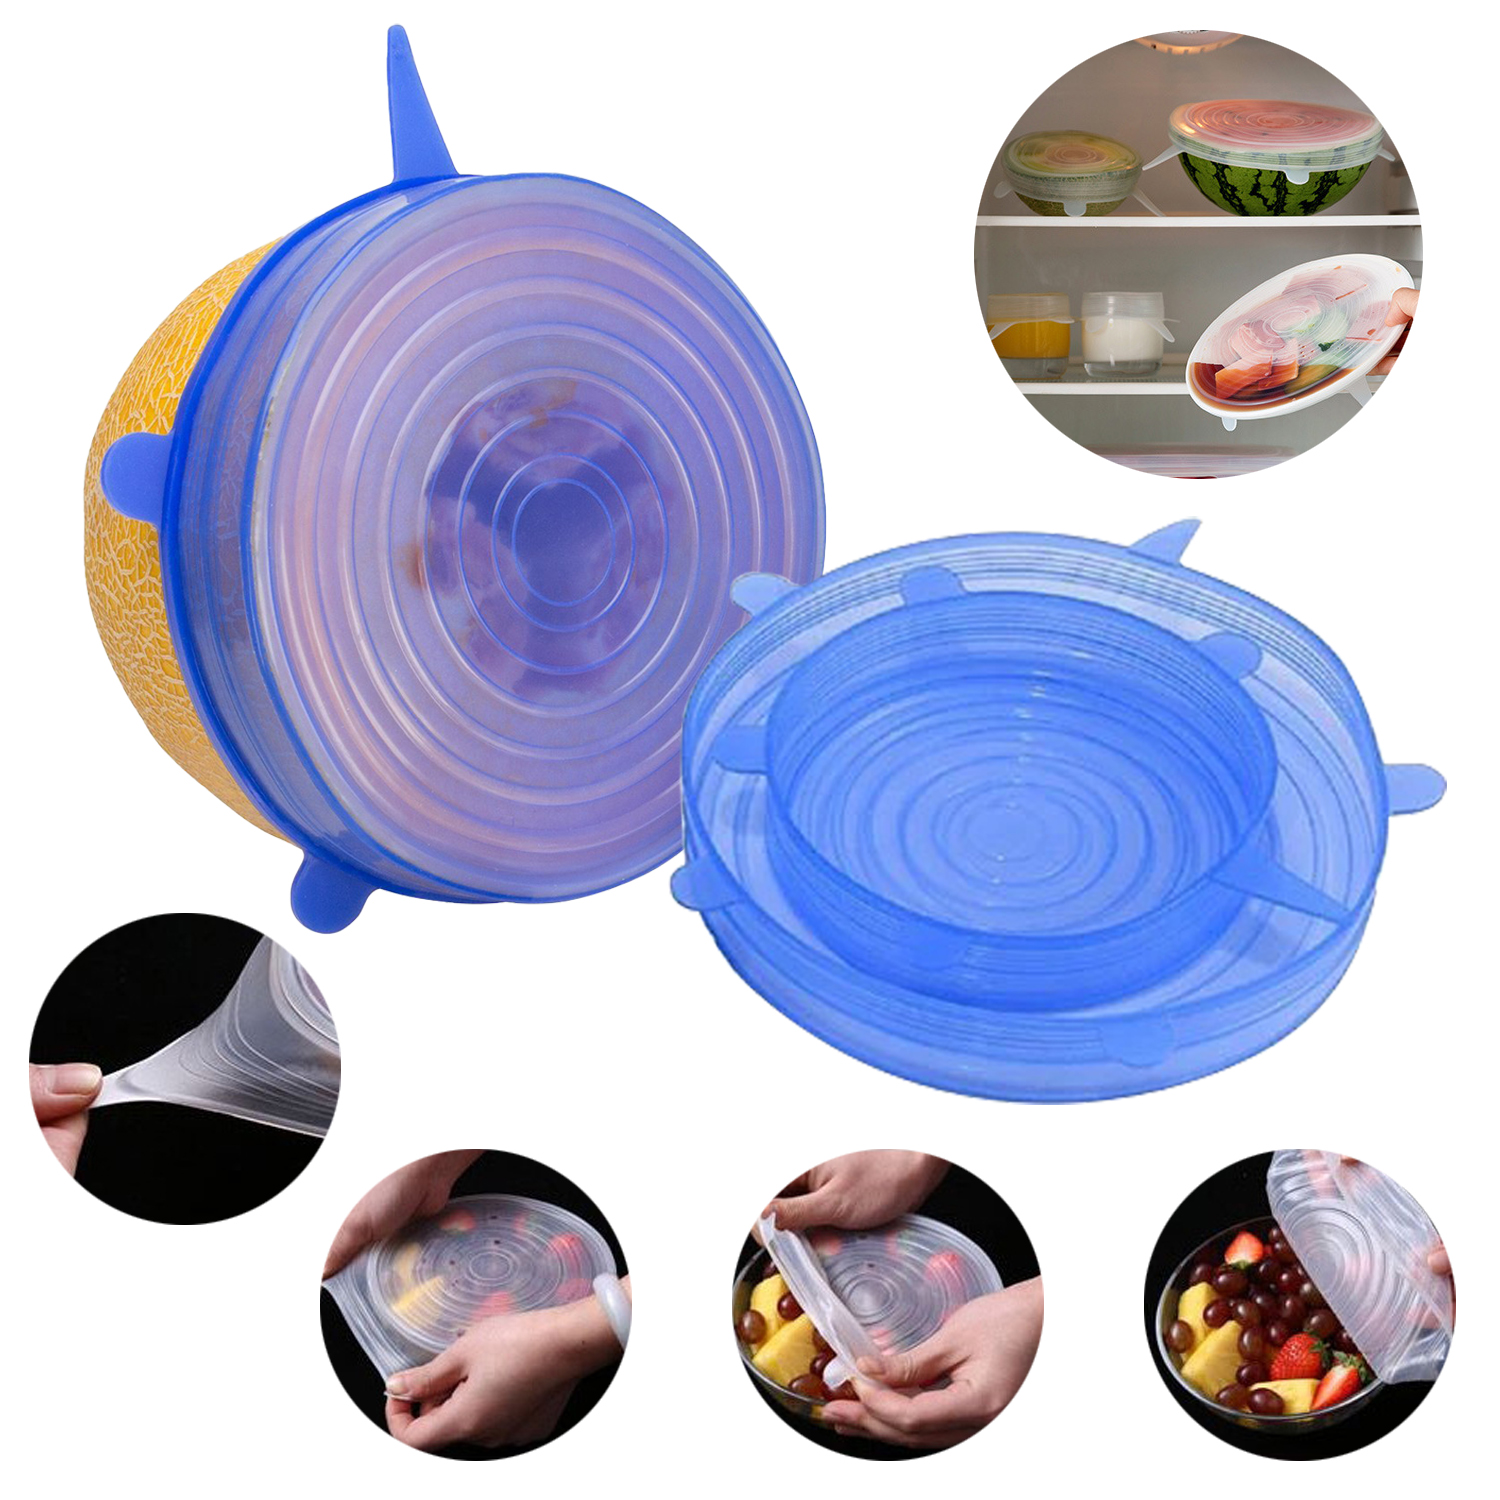 Silicone Cover Stretch Lids 6 Pcs Reusable Airtight Food Wrap Covers Bowl Pot Cover Silicone Stretch Lids Cooking Cookware Tools